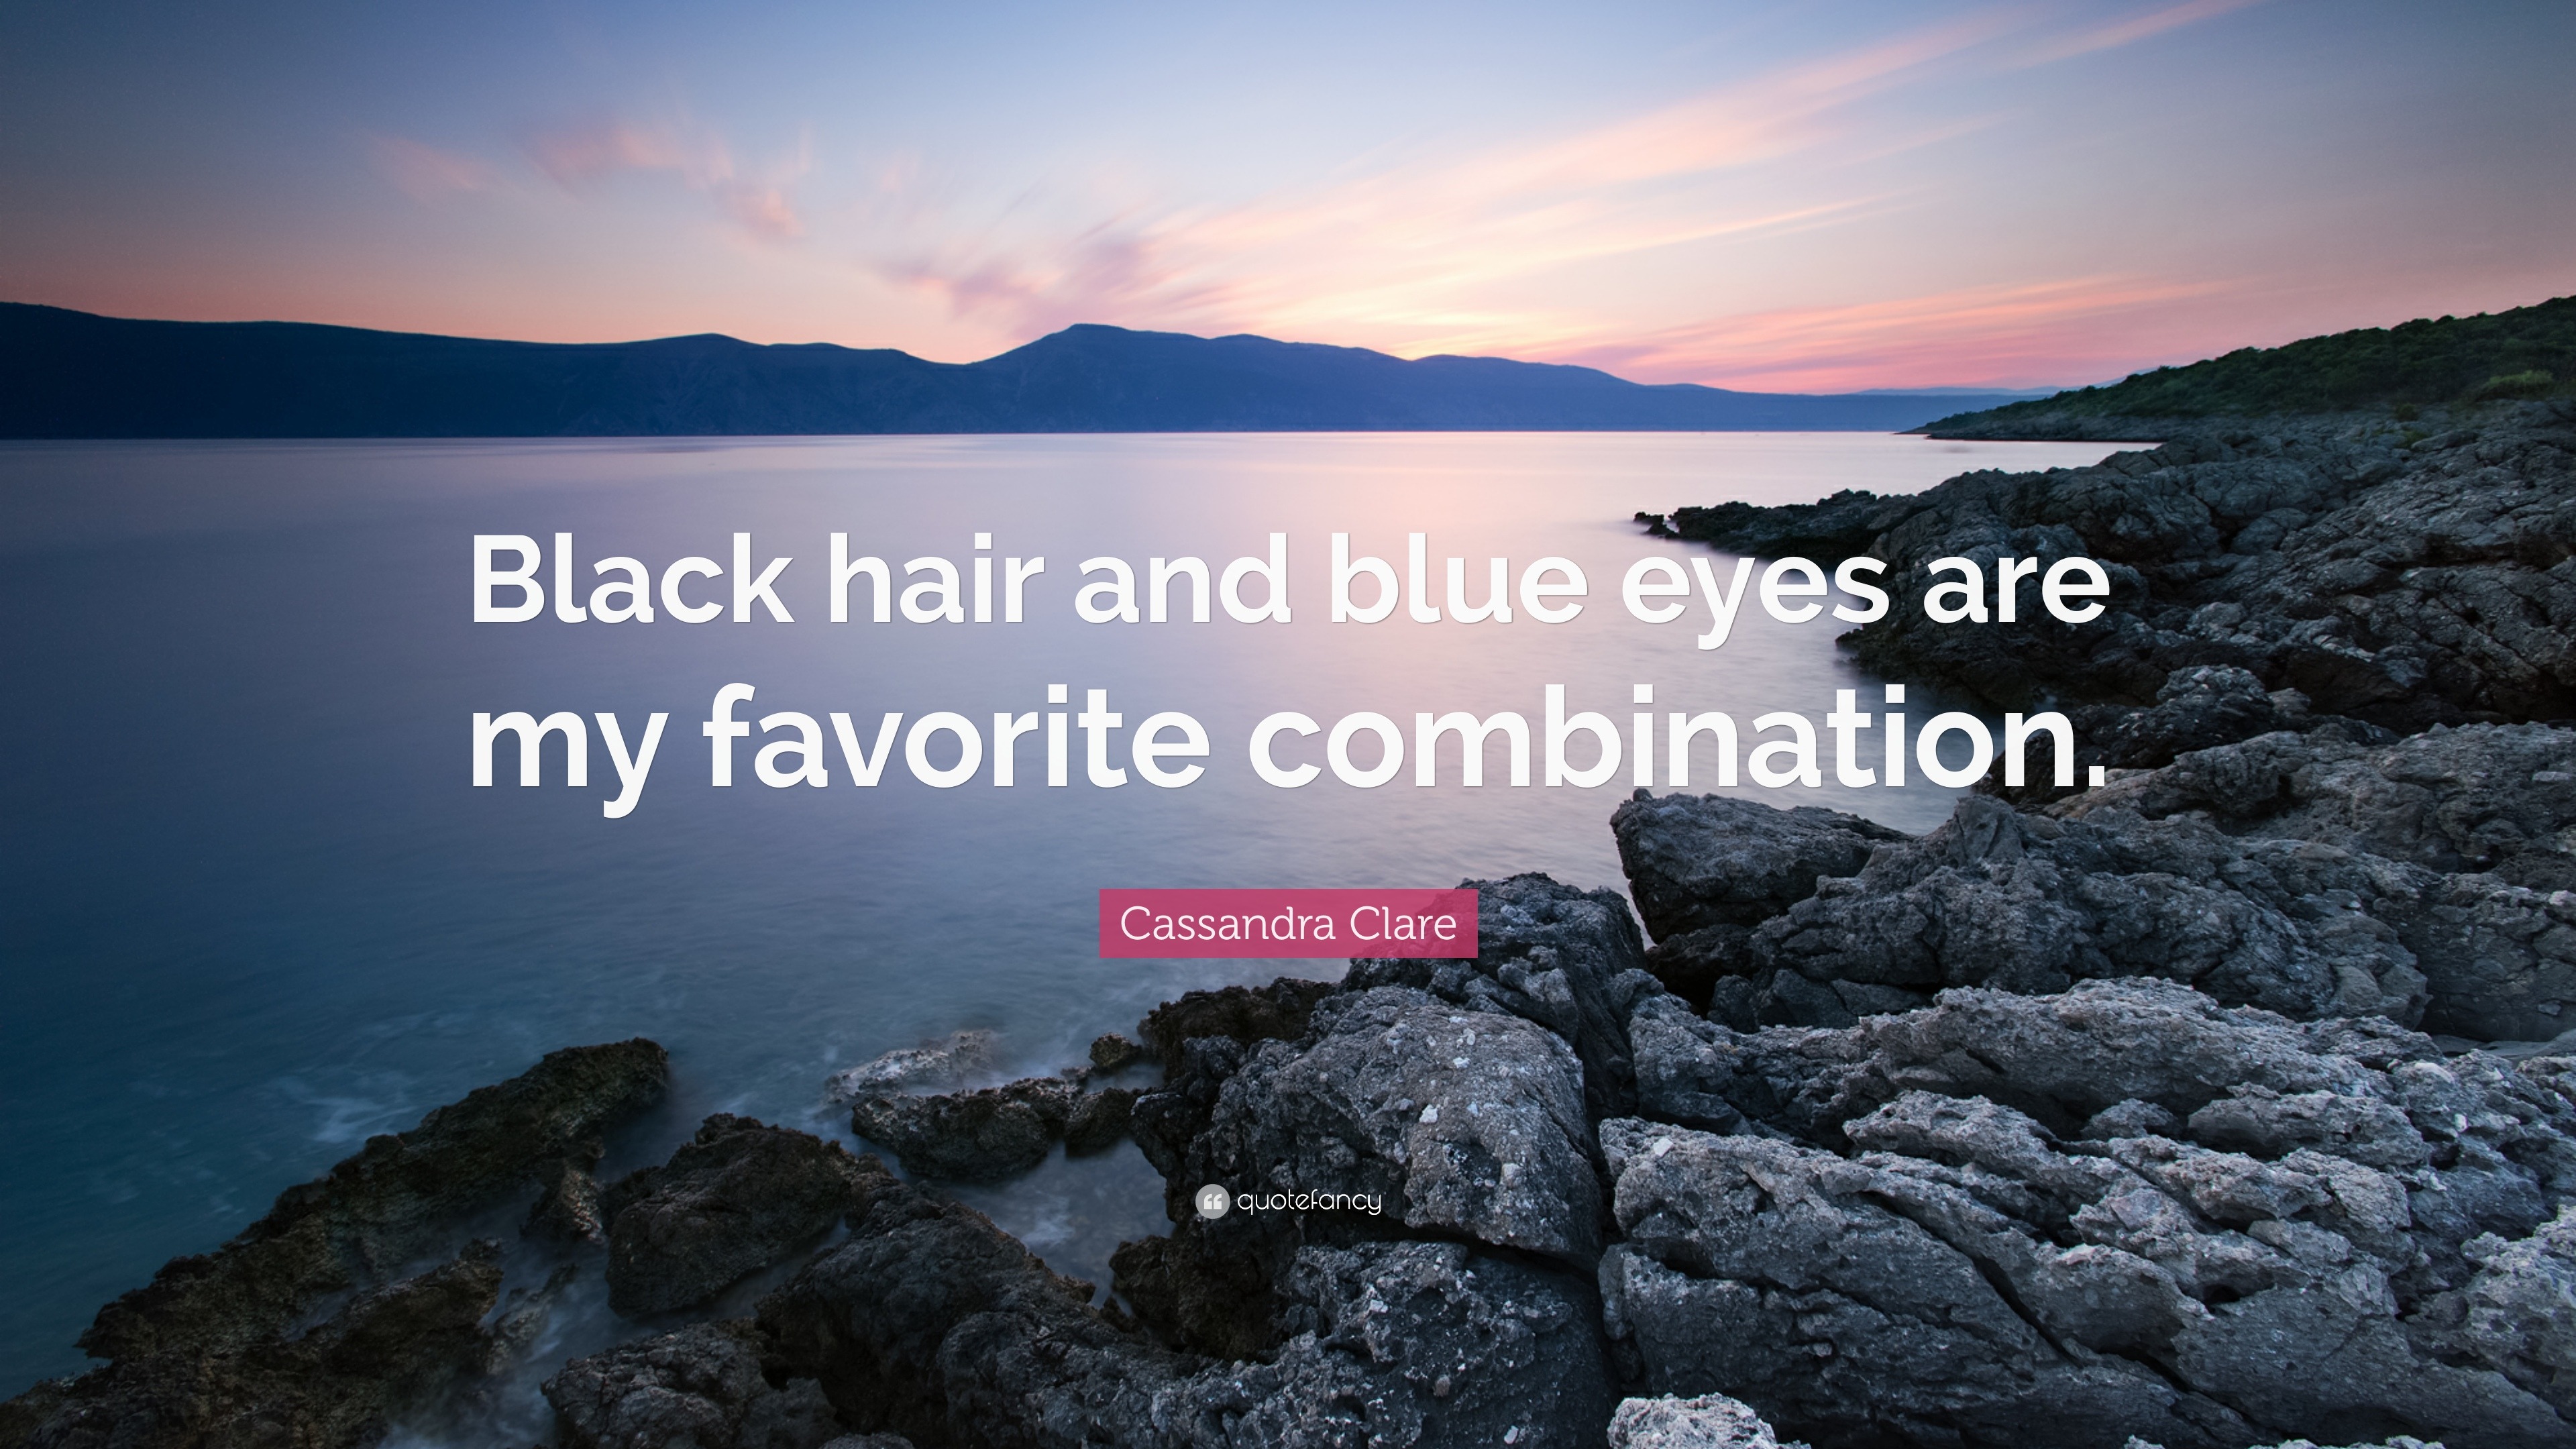 Cassandra Clare Quote: “Black hair and blue eyes are my favorite  combination.”